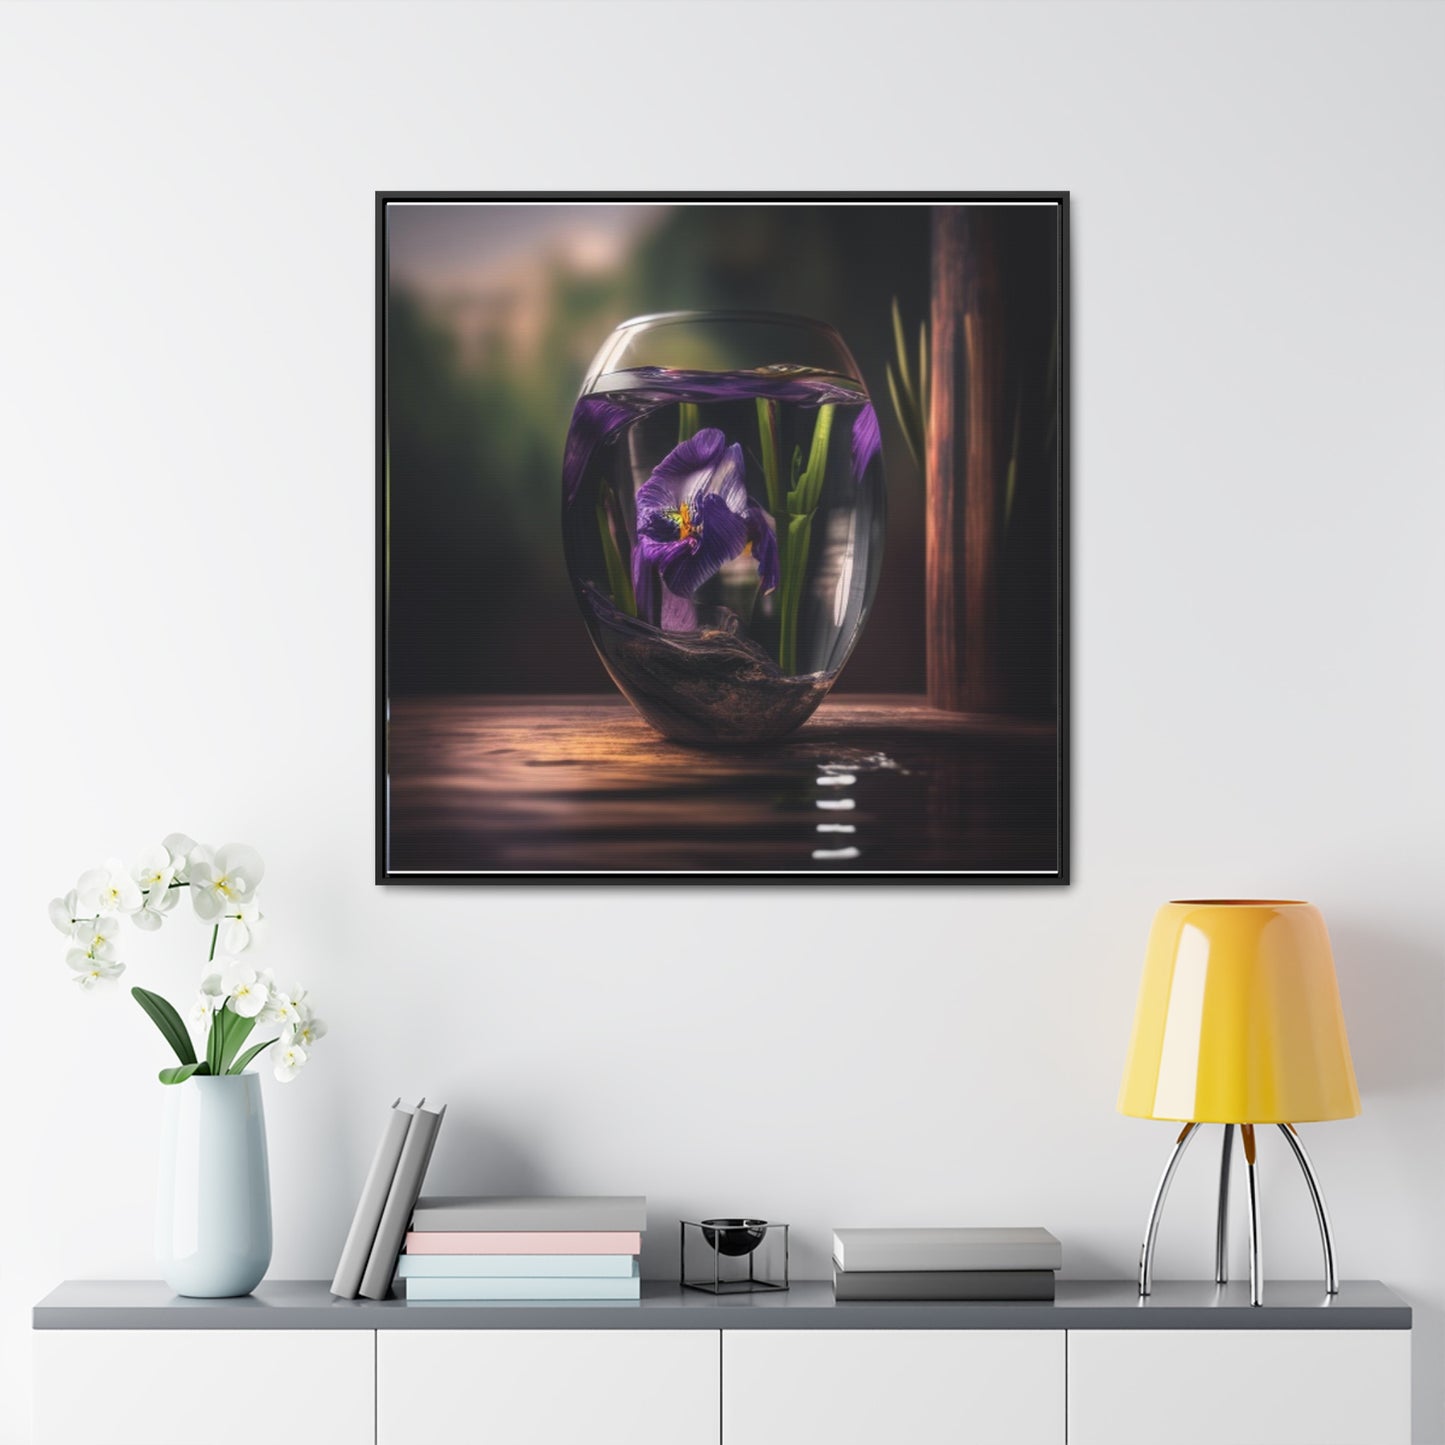 Gallery Canvas Wraps, Square Frame Purple Iris in a vase 4